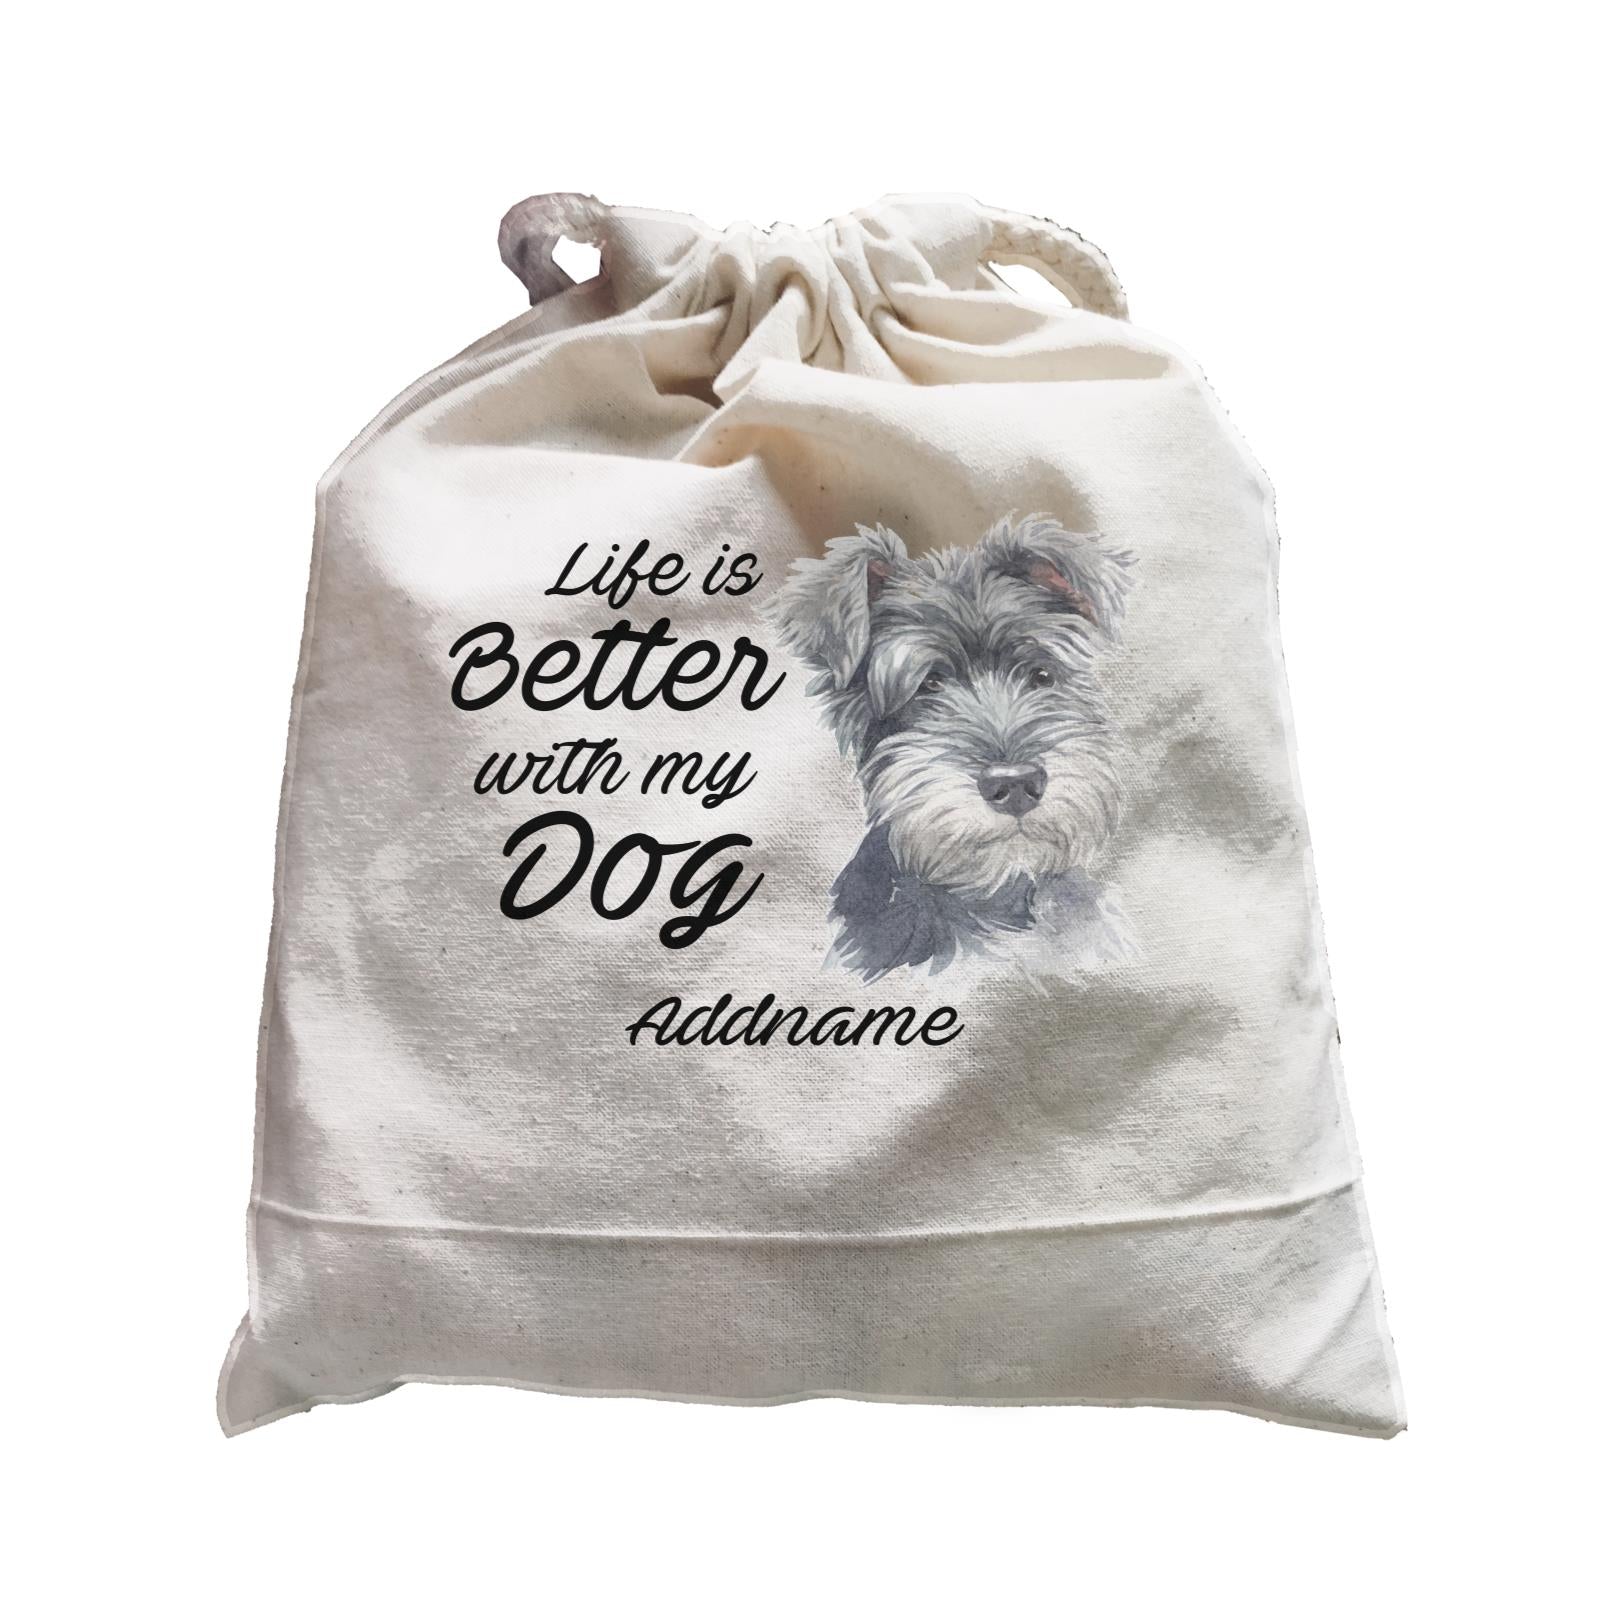 Watercolor Life is Better With My Dog Schnauzer Right Addname Satchel